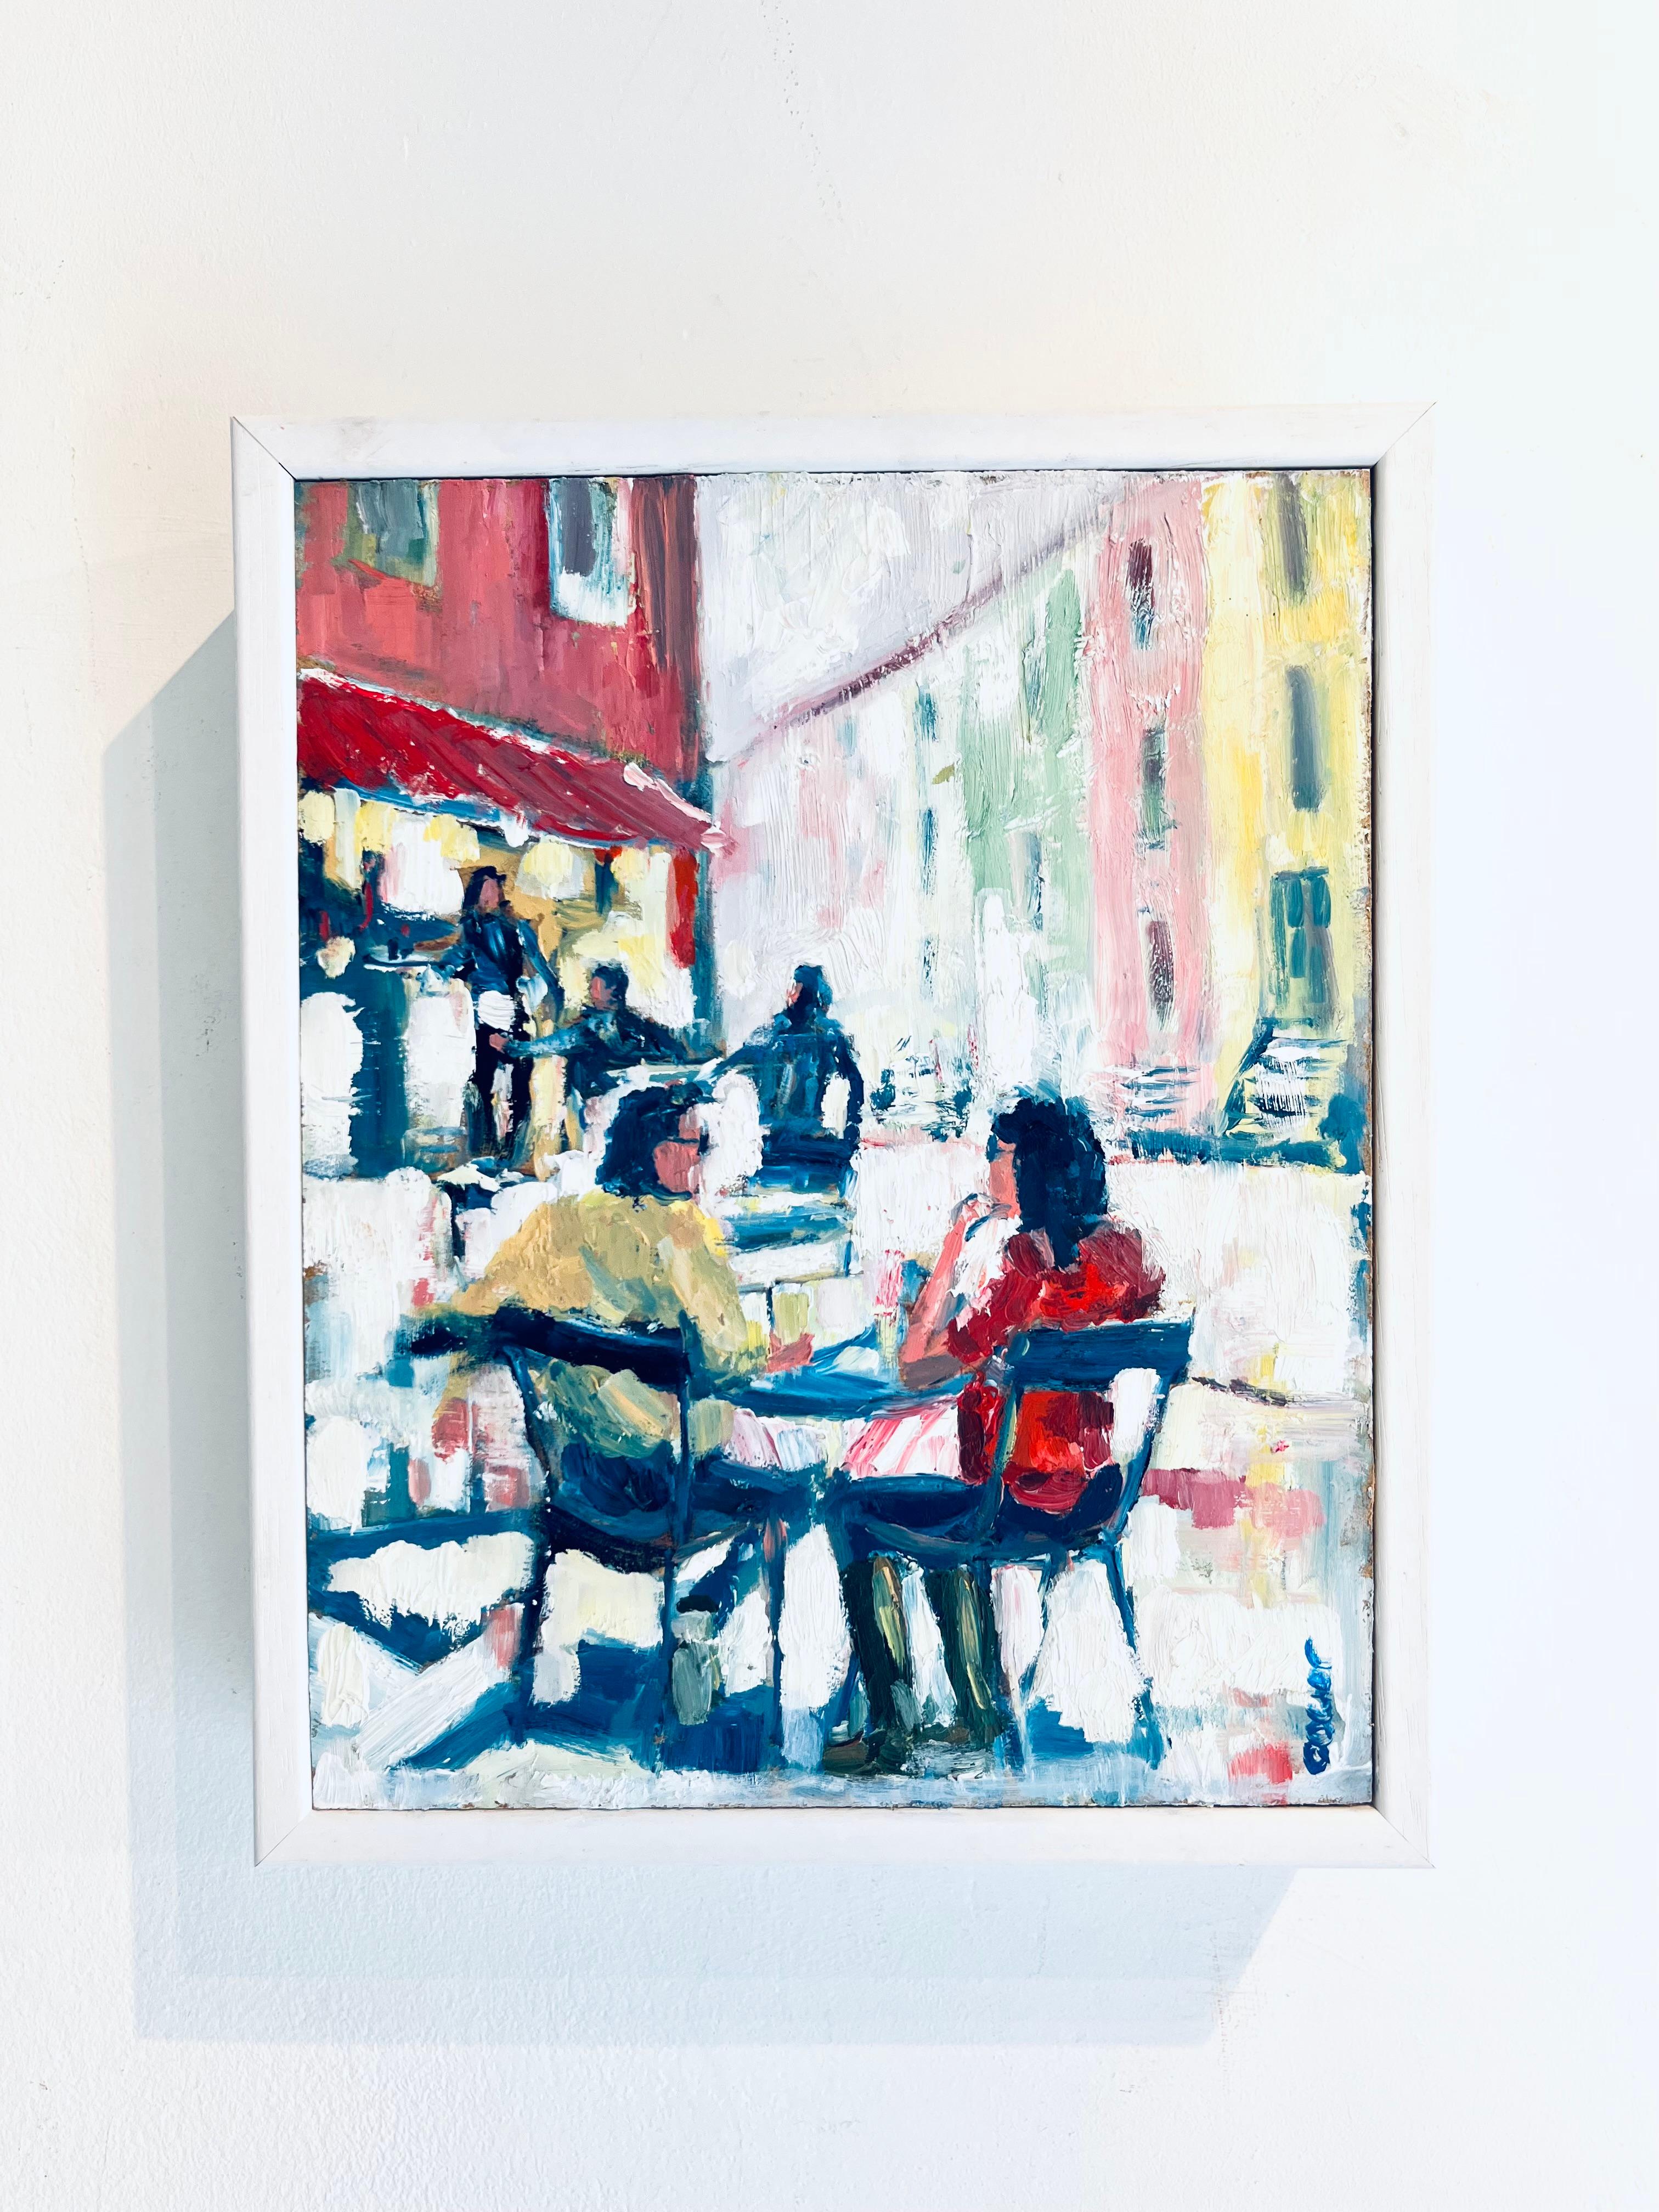 Cafe Society - contemporary cityscape Art Original figurative cityscape painting - Painting by Richard Gower